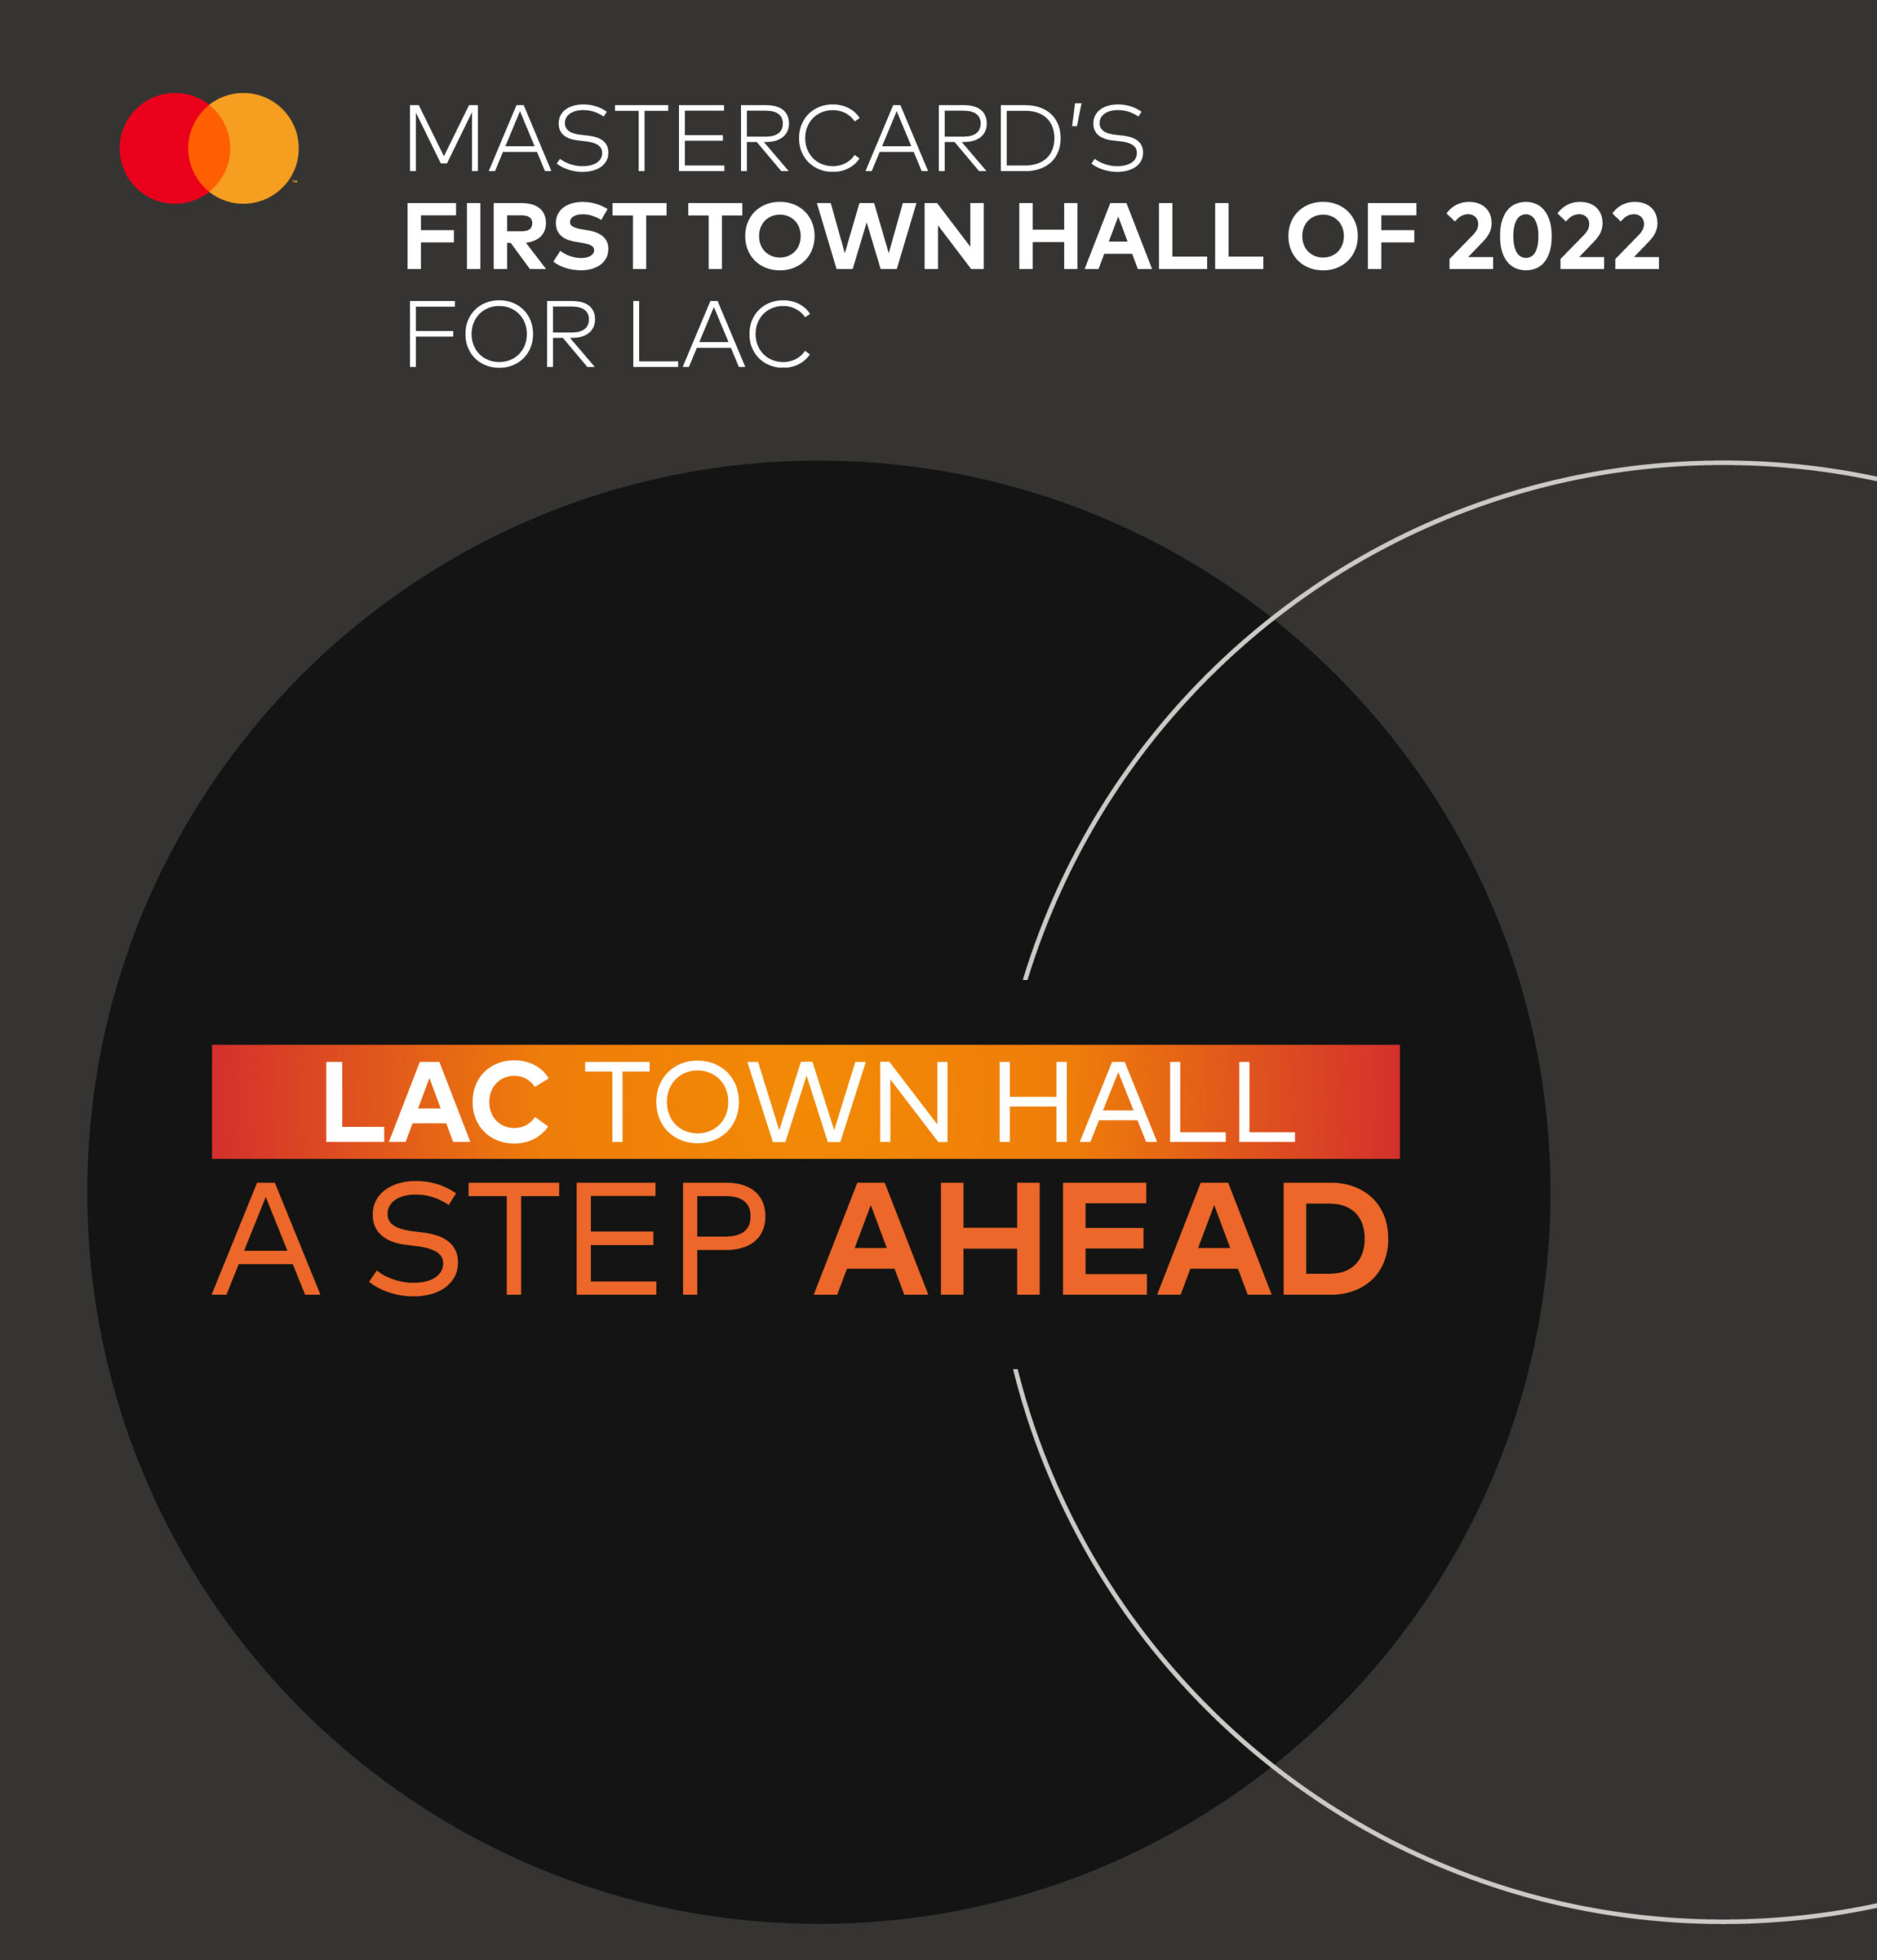  First Town Hall of 2022 for LAC